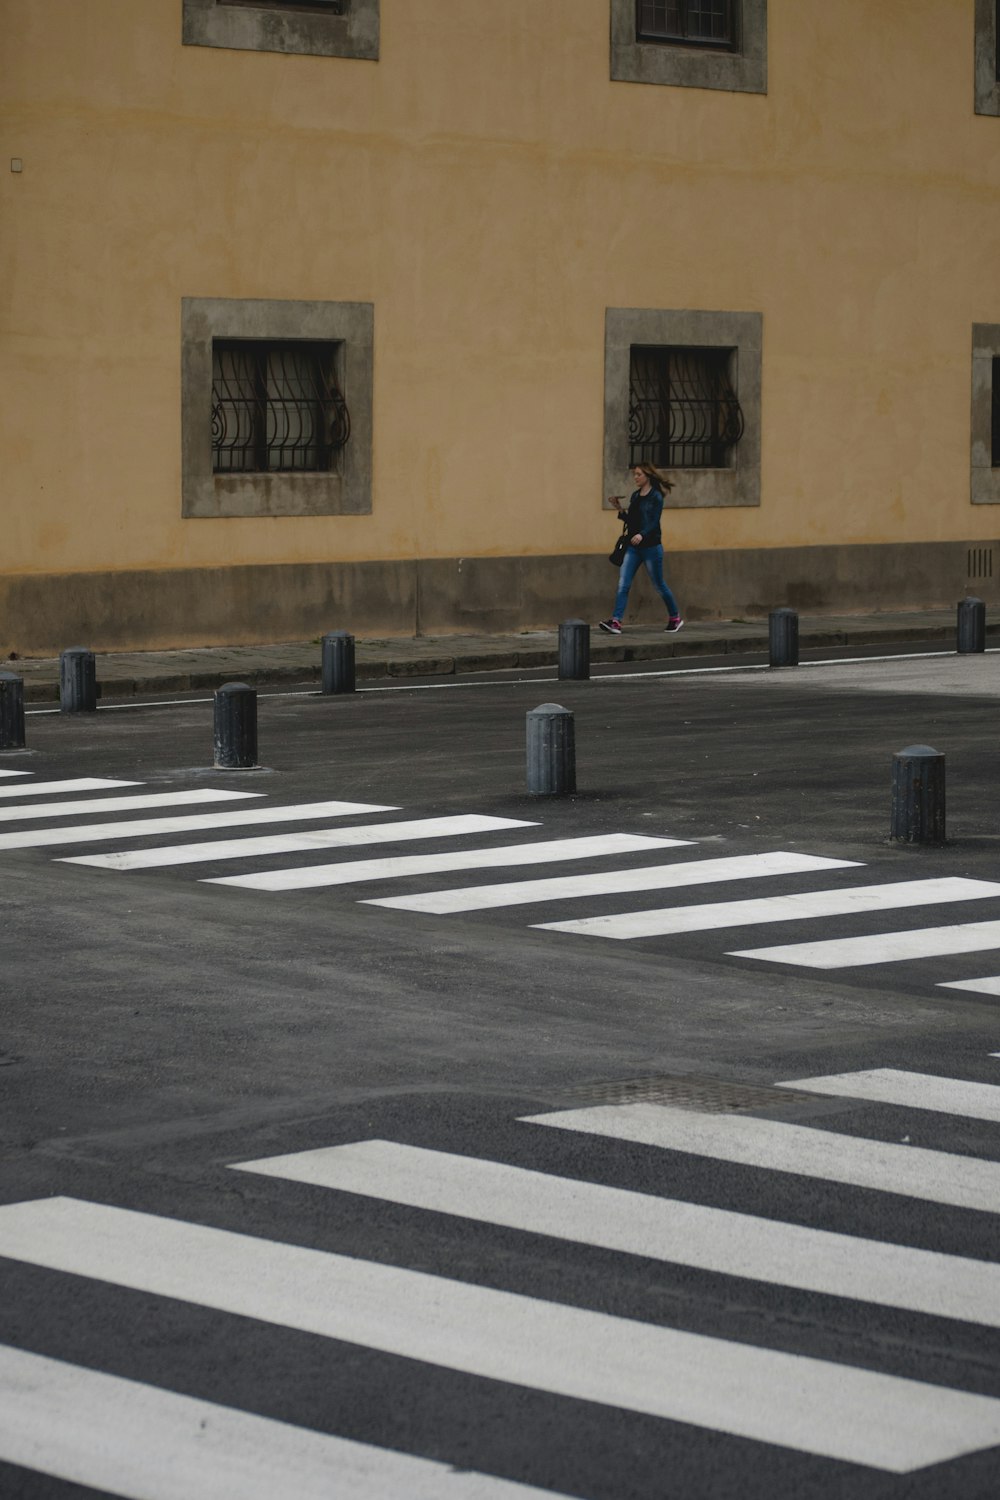 a person walking across a cross walk in front of a building